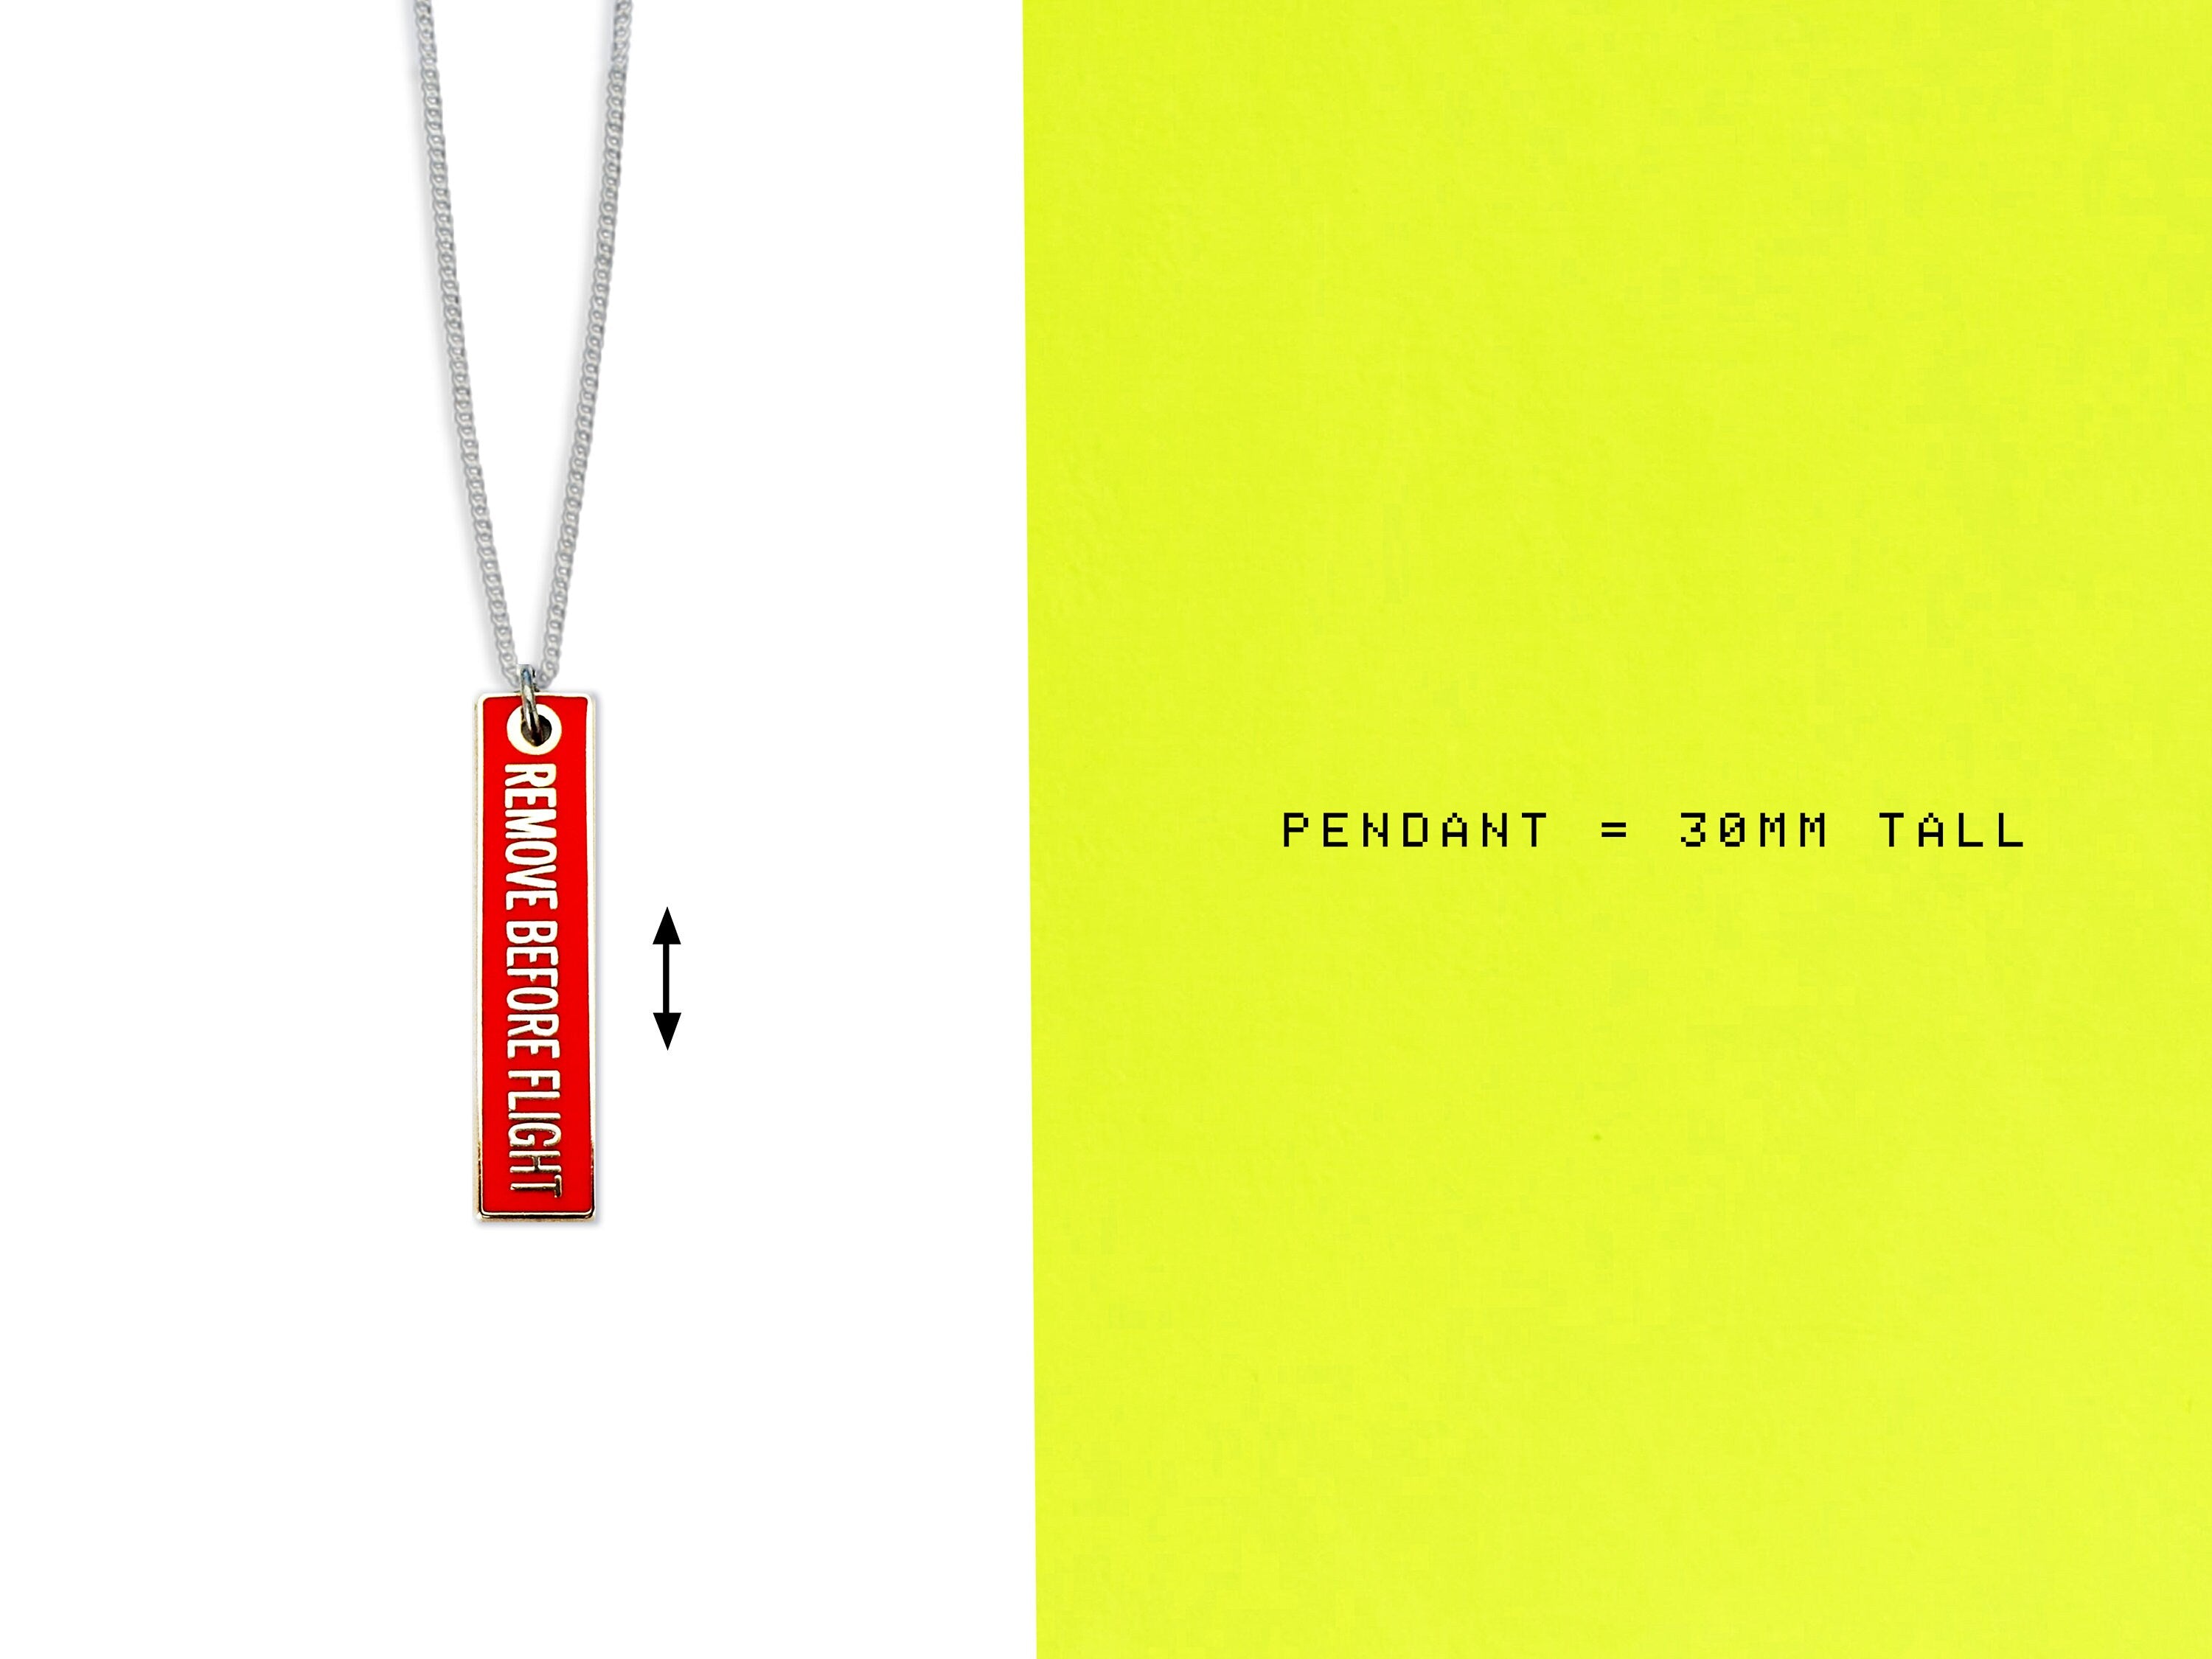 Remove Before Flight Necklace - Astronomy / Aerospace Pendant Gift - Space Jewelry For Him / Her